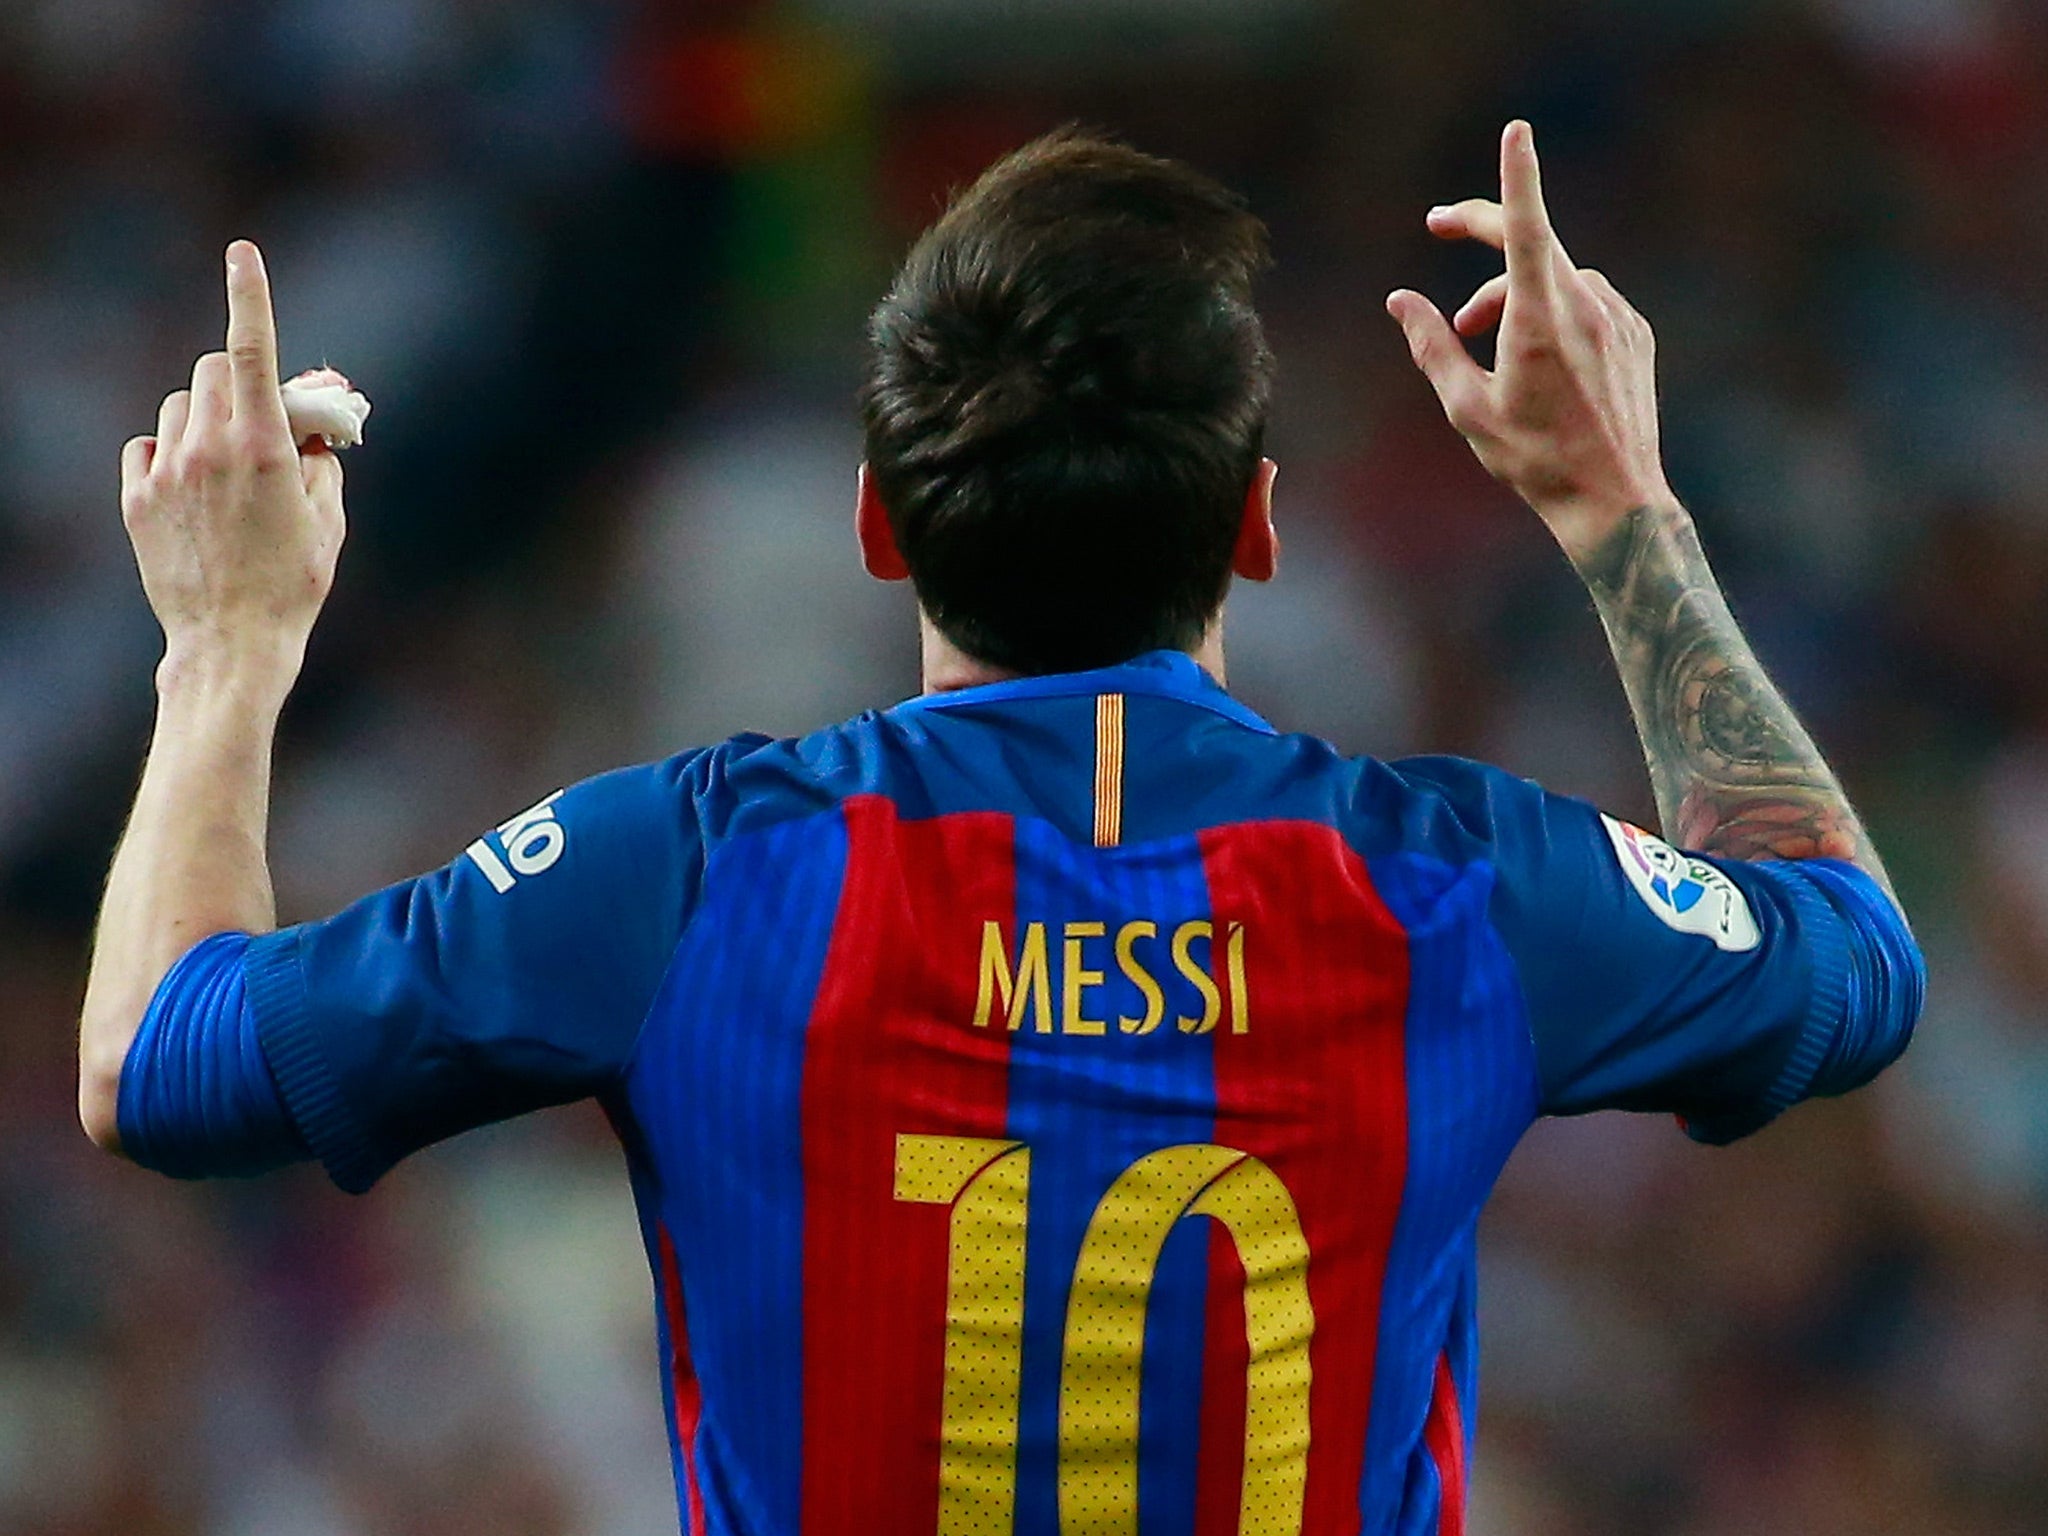 Barcelona superstar Lionel Messi was given a 21-month jail sentence for tax evasion last year